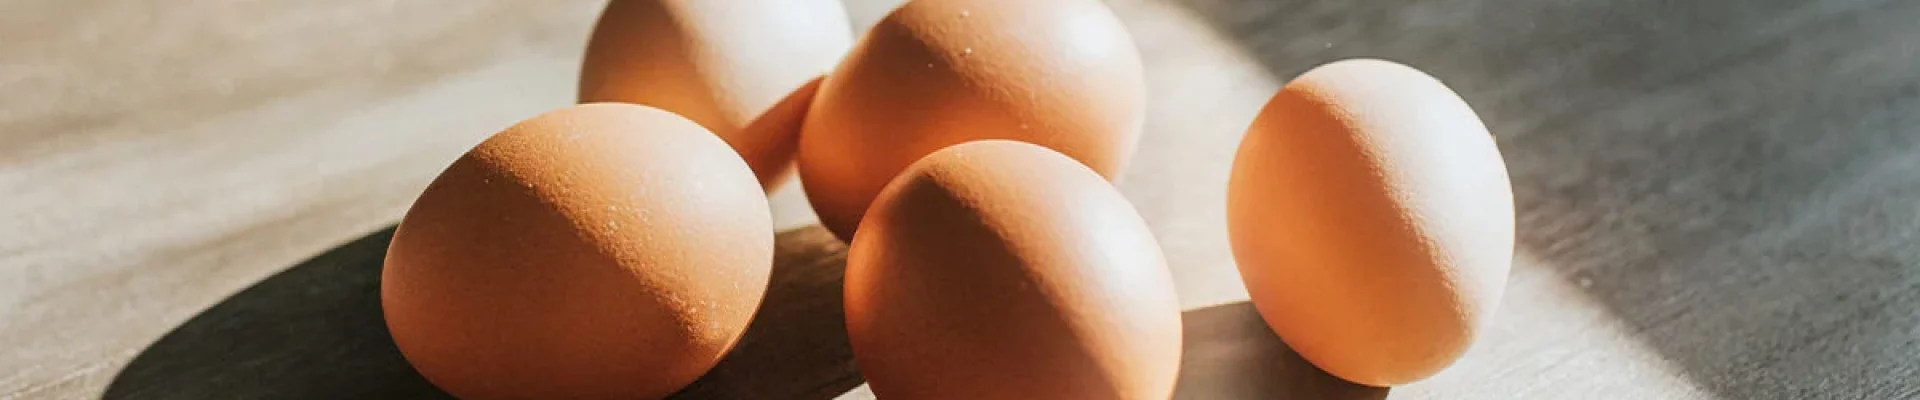 Protein in an egg